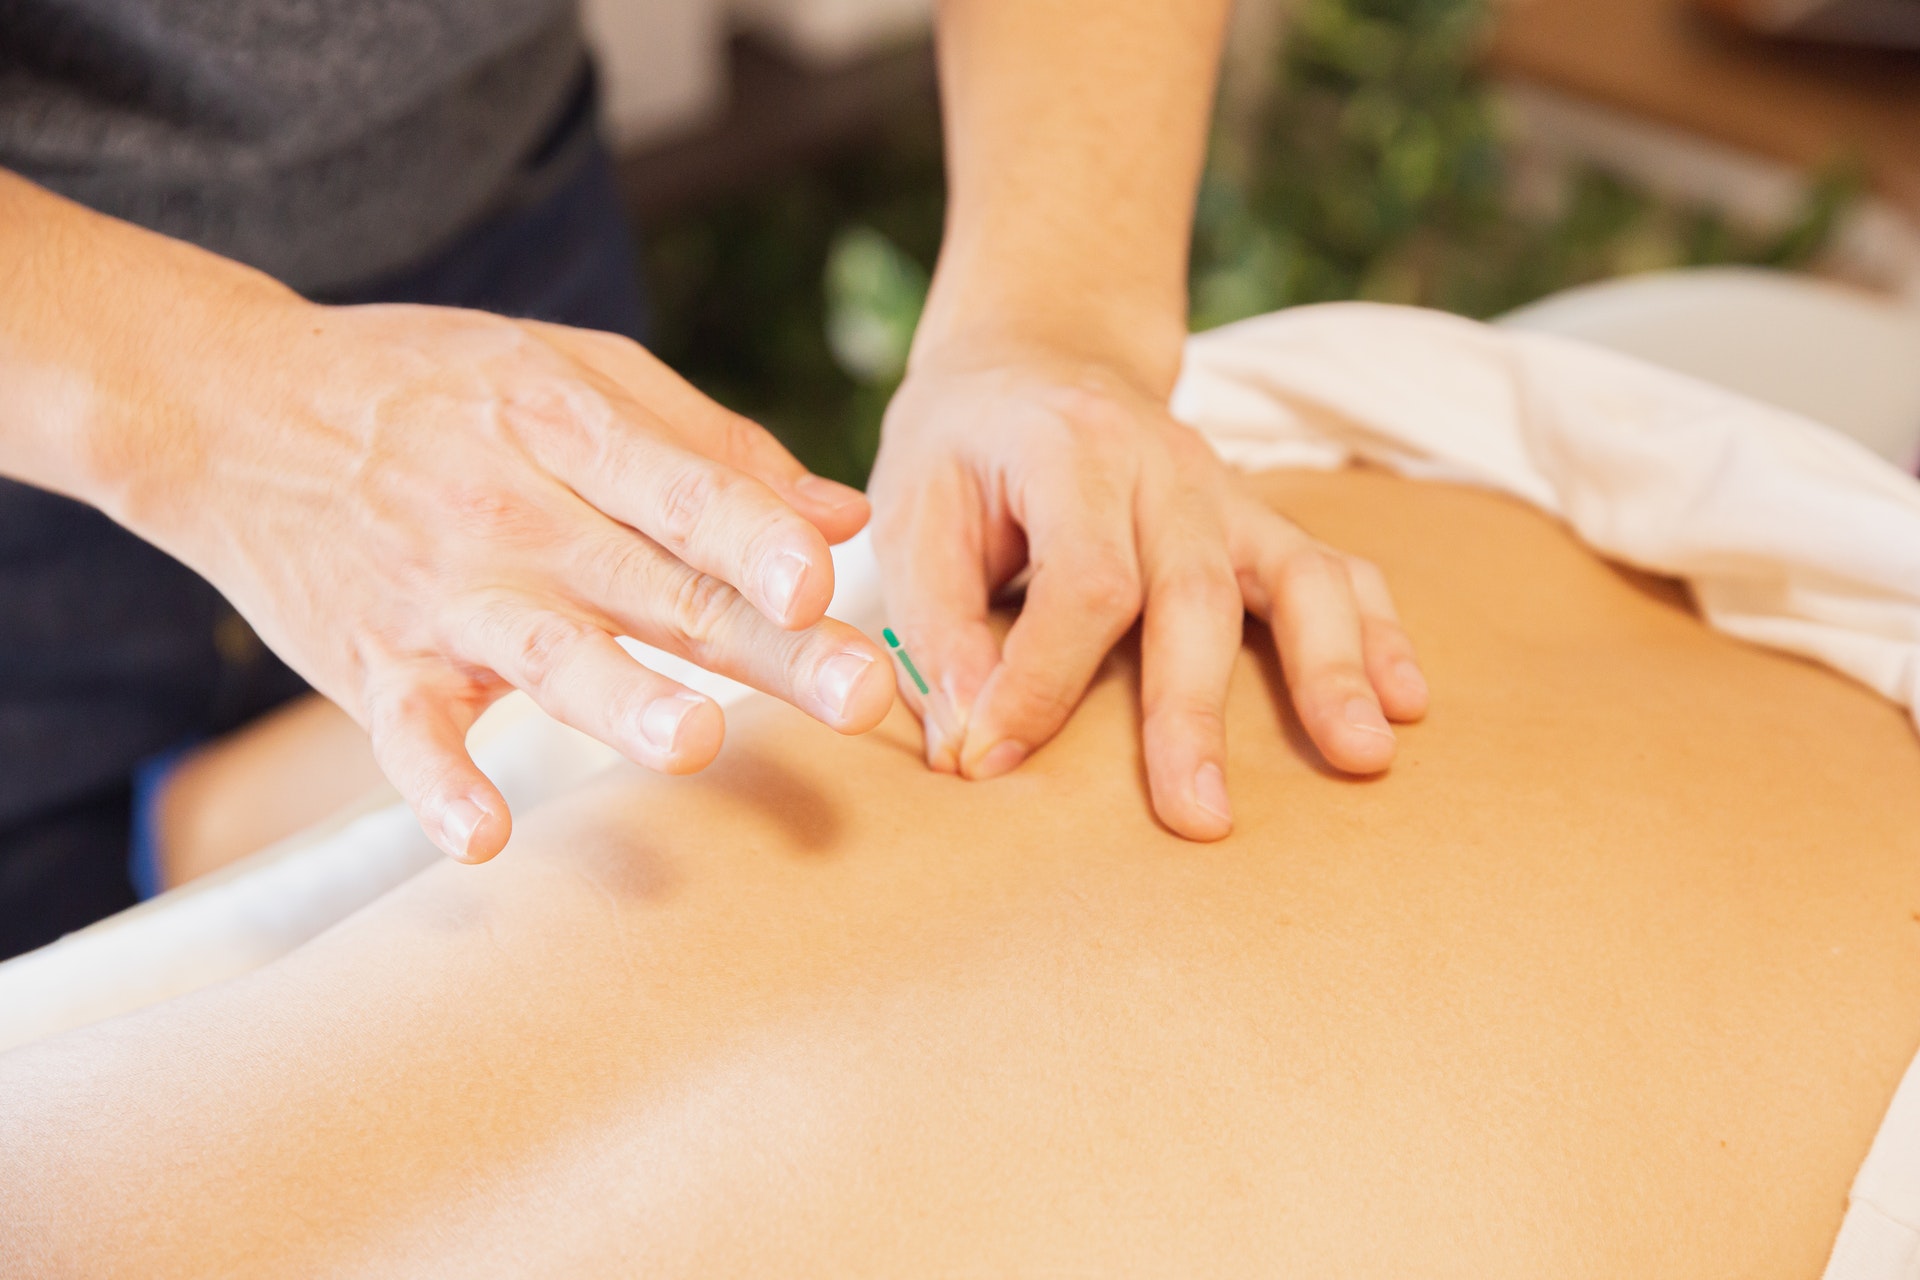 How Does Acupuncture Work to Relieve Pain? Everything You Need to Know